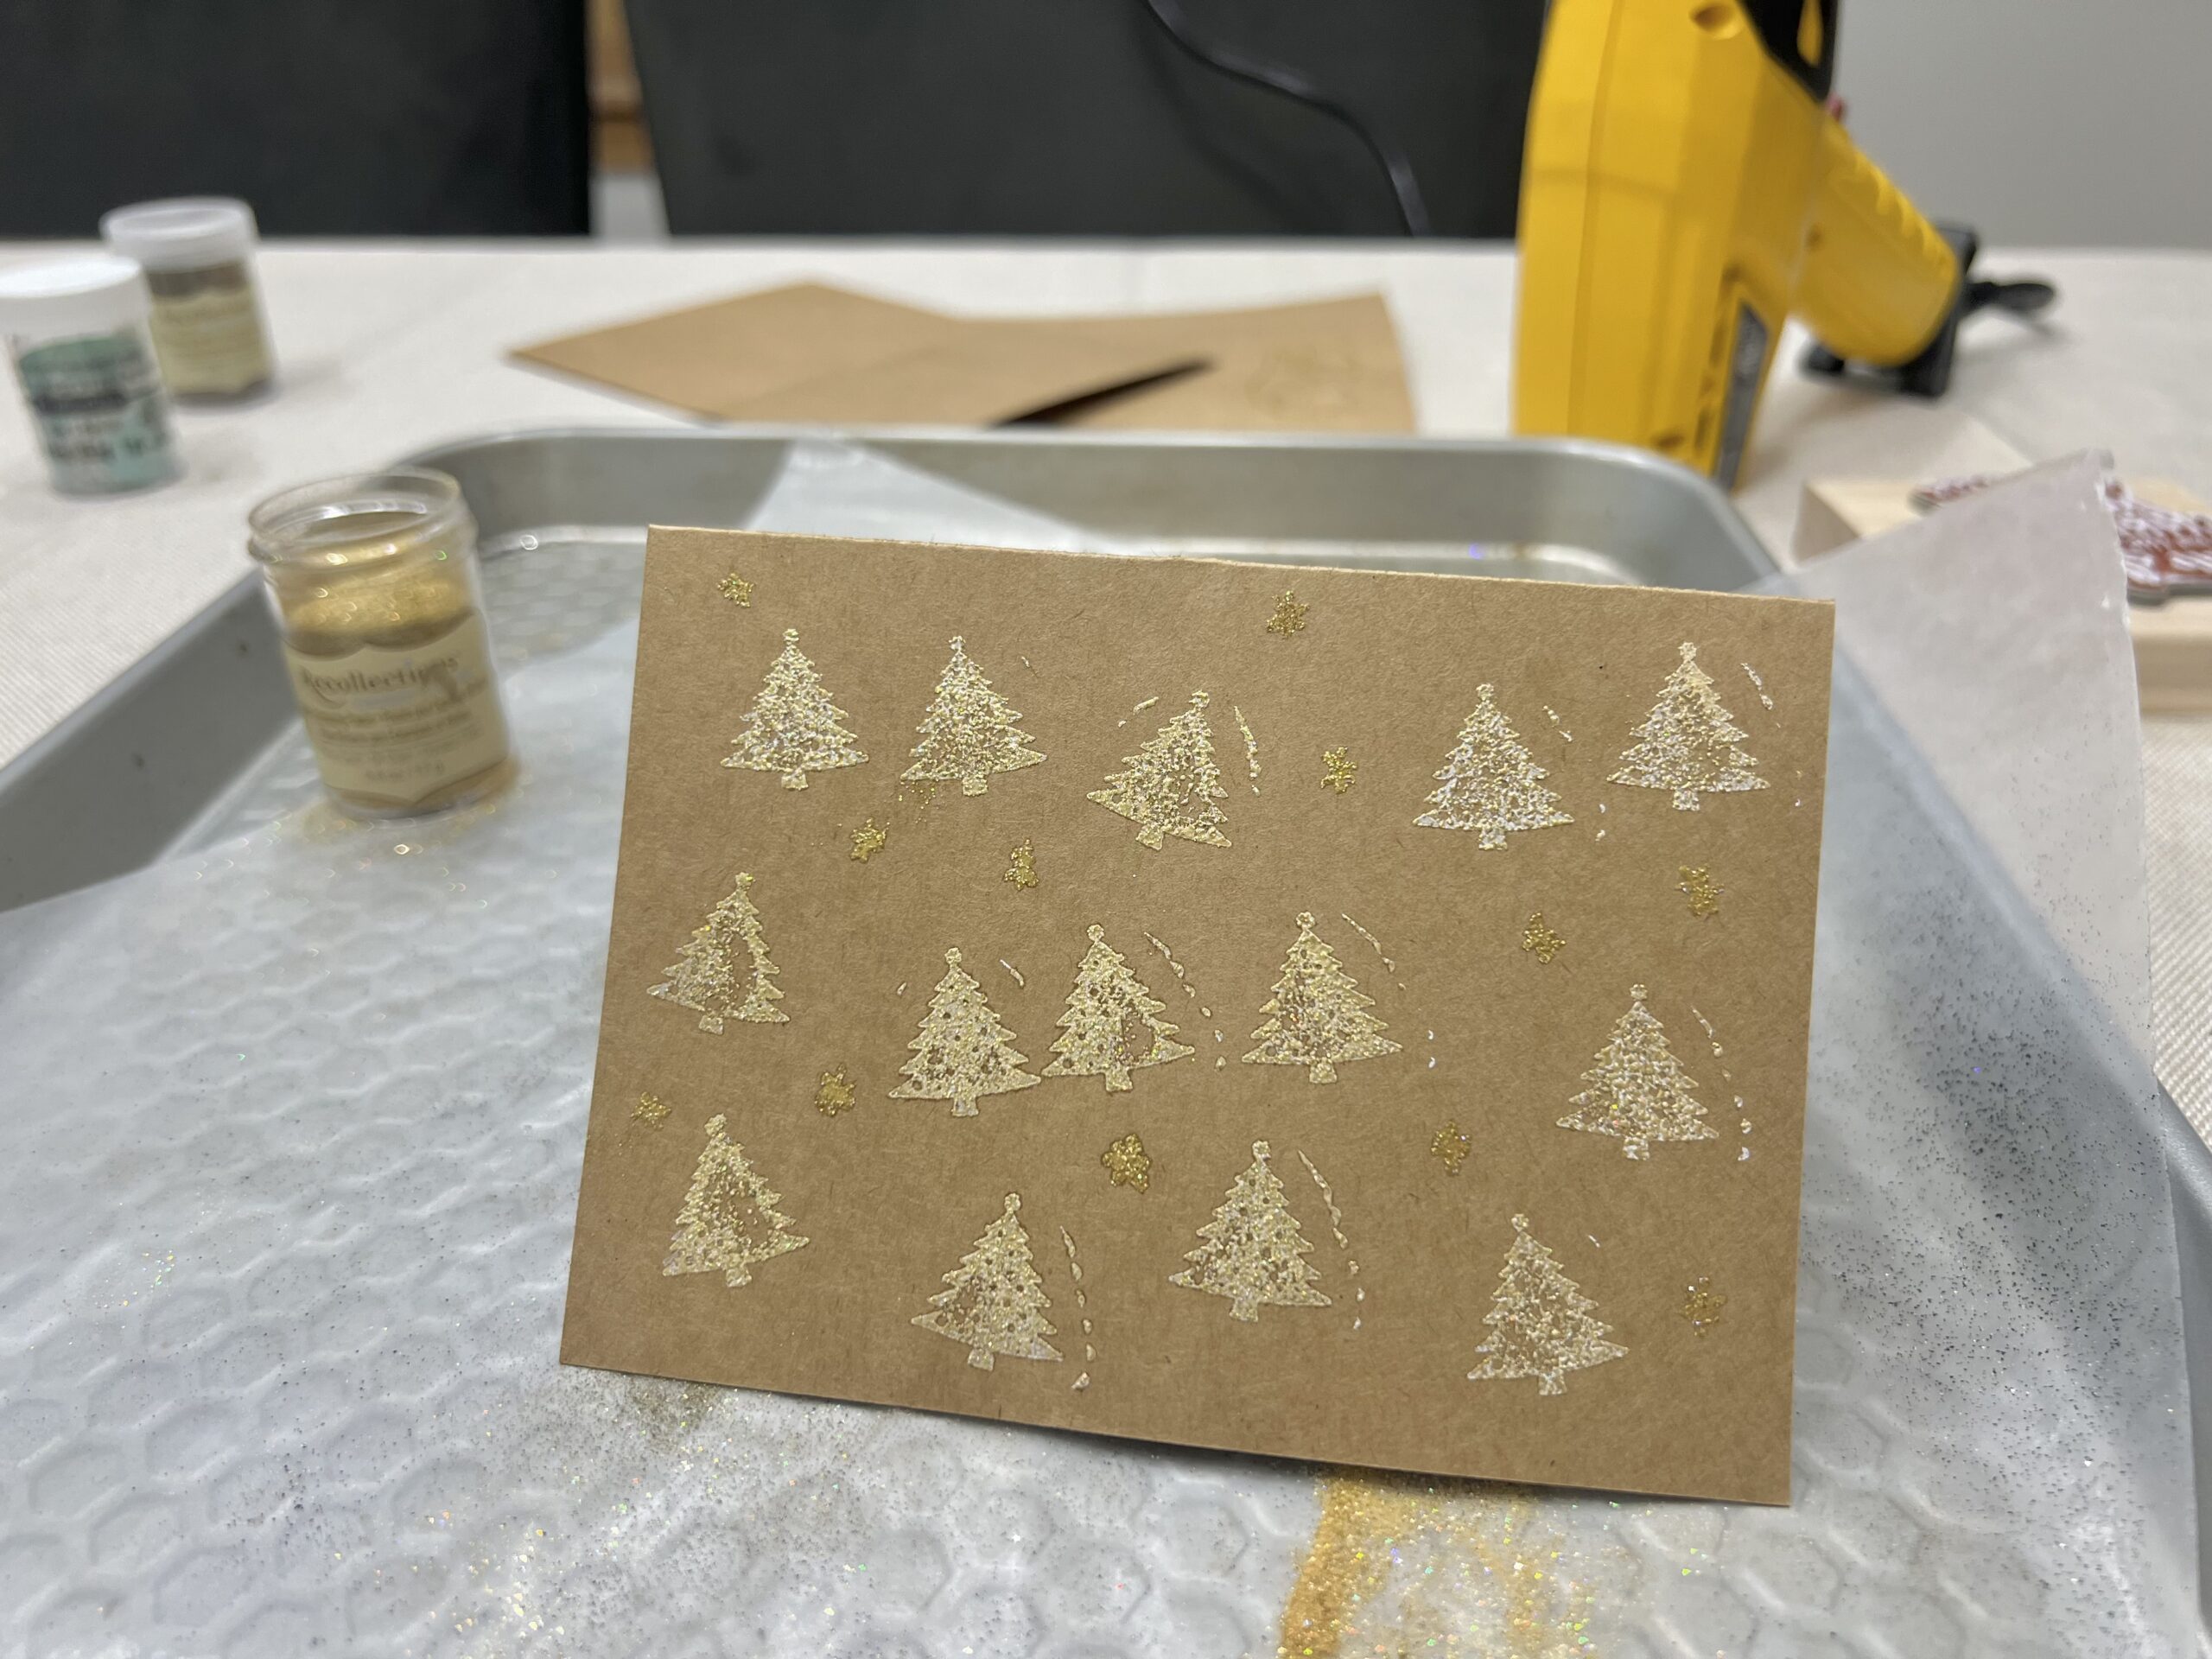 Embossed mini gold Christmas trees on a card